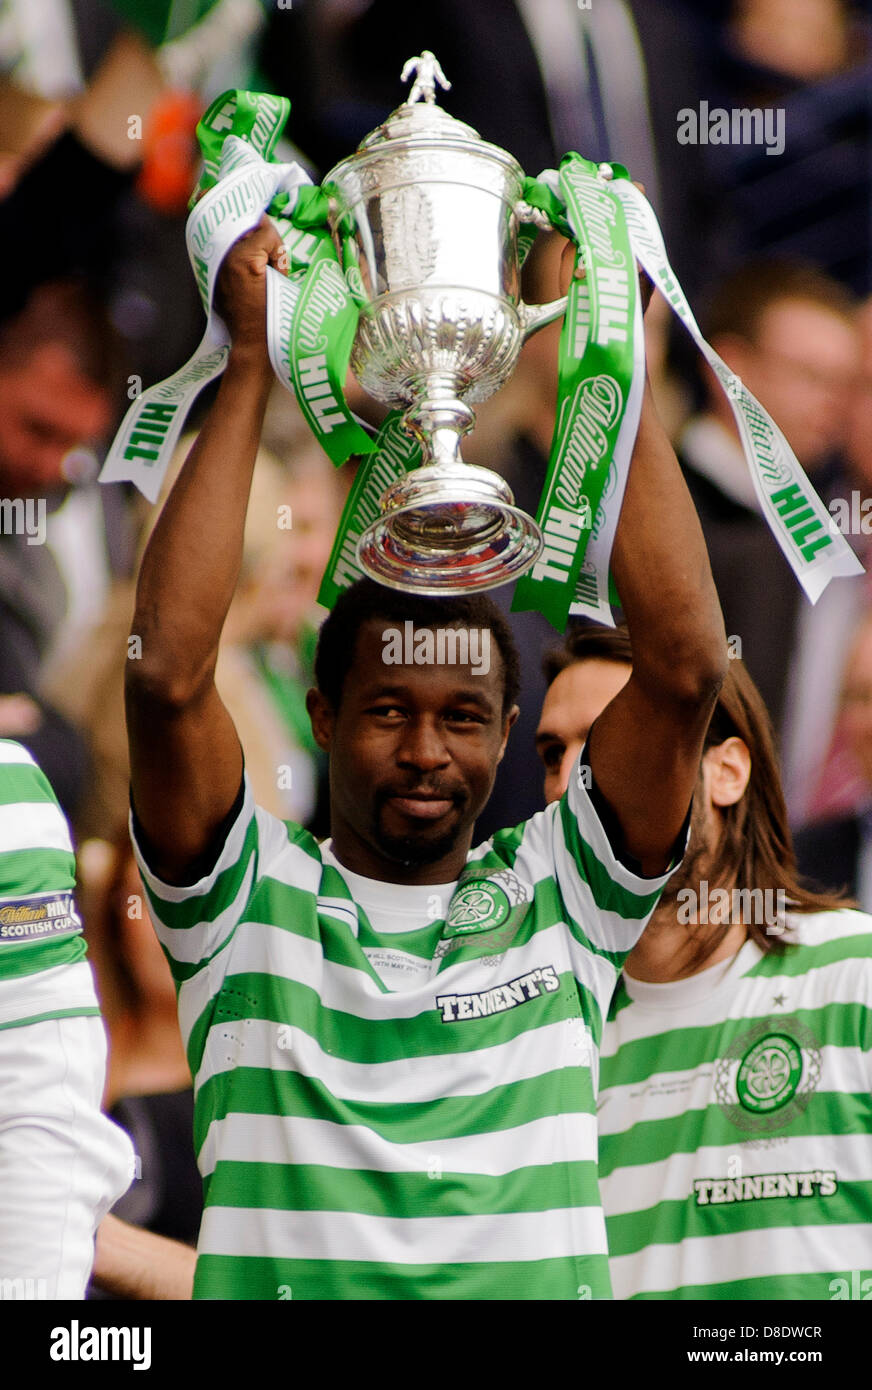 Glasgow, Scotland, UK. Sunday 26th May 2013. Efe Ambrose lifts the cup during the Hibs v Celtic William Hill Scottish Cup Final at Hampden Park Stadium. Credit: Colin Lunn / Alamy Live News Stock Photo